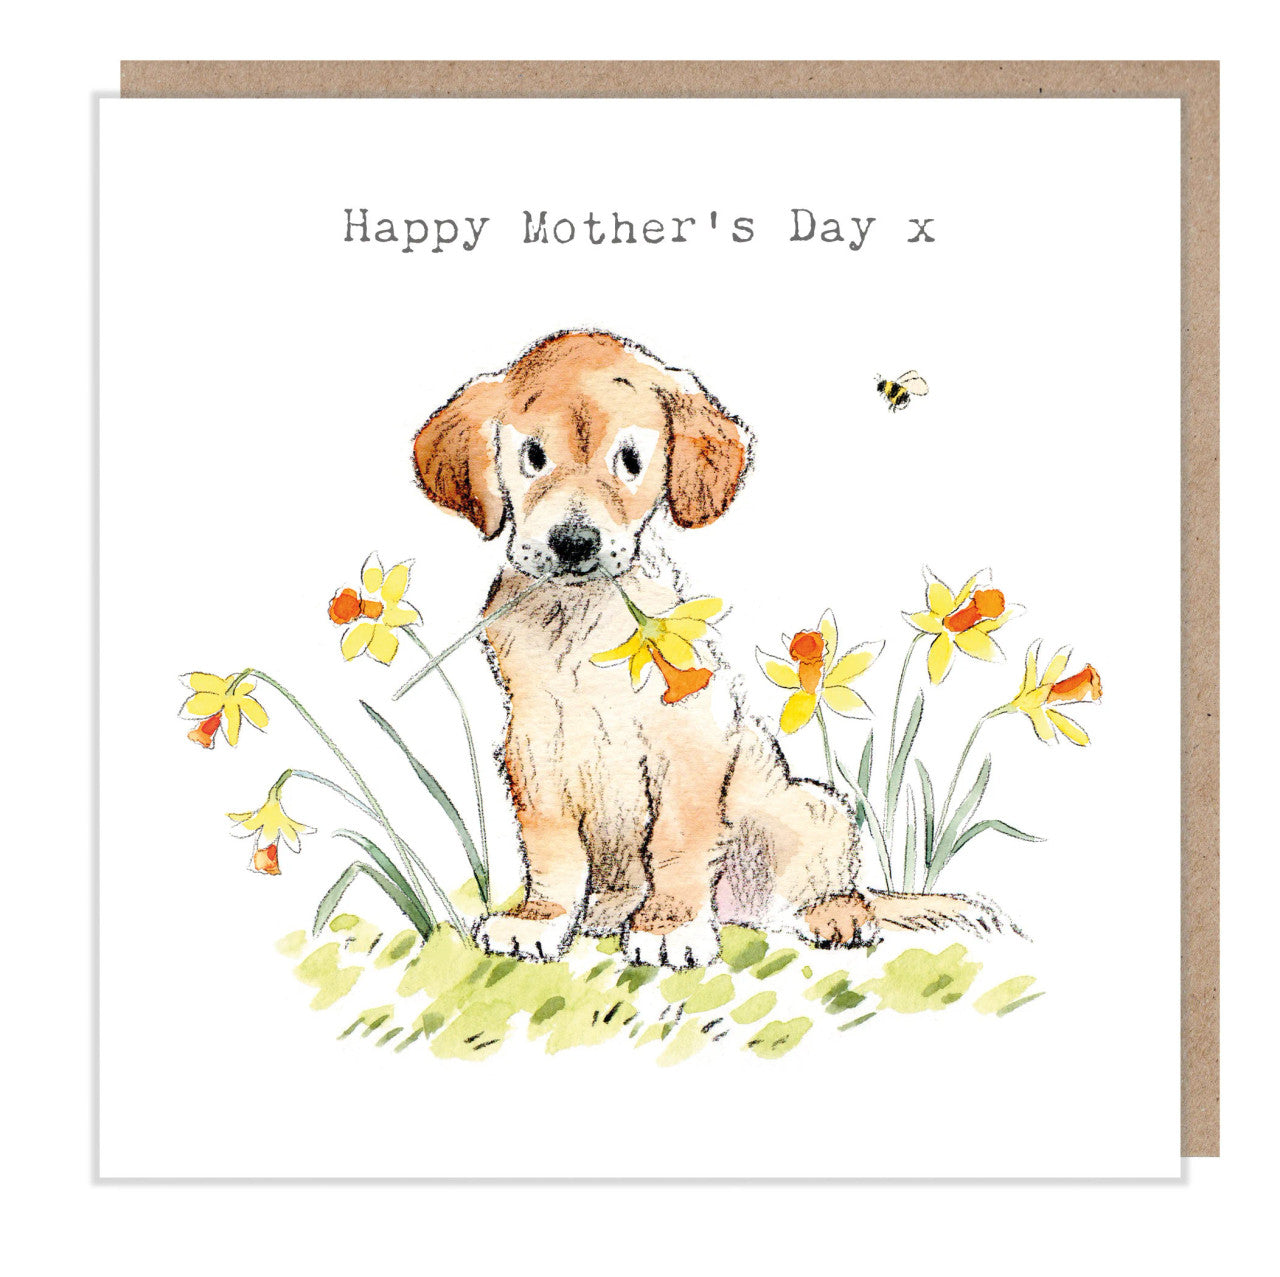 Golden Labrador Happy Mother's Day Greetings Card from Paper Shed Designs